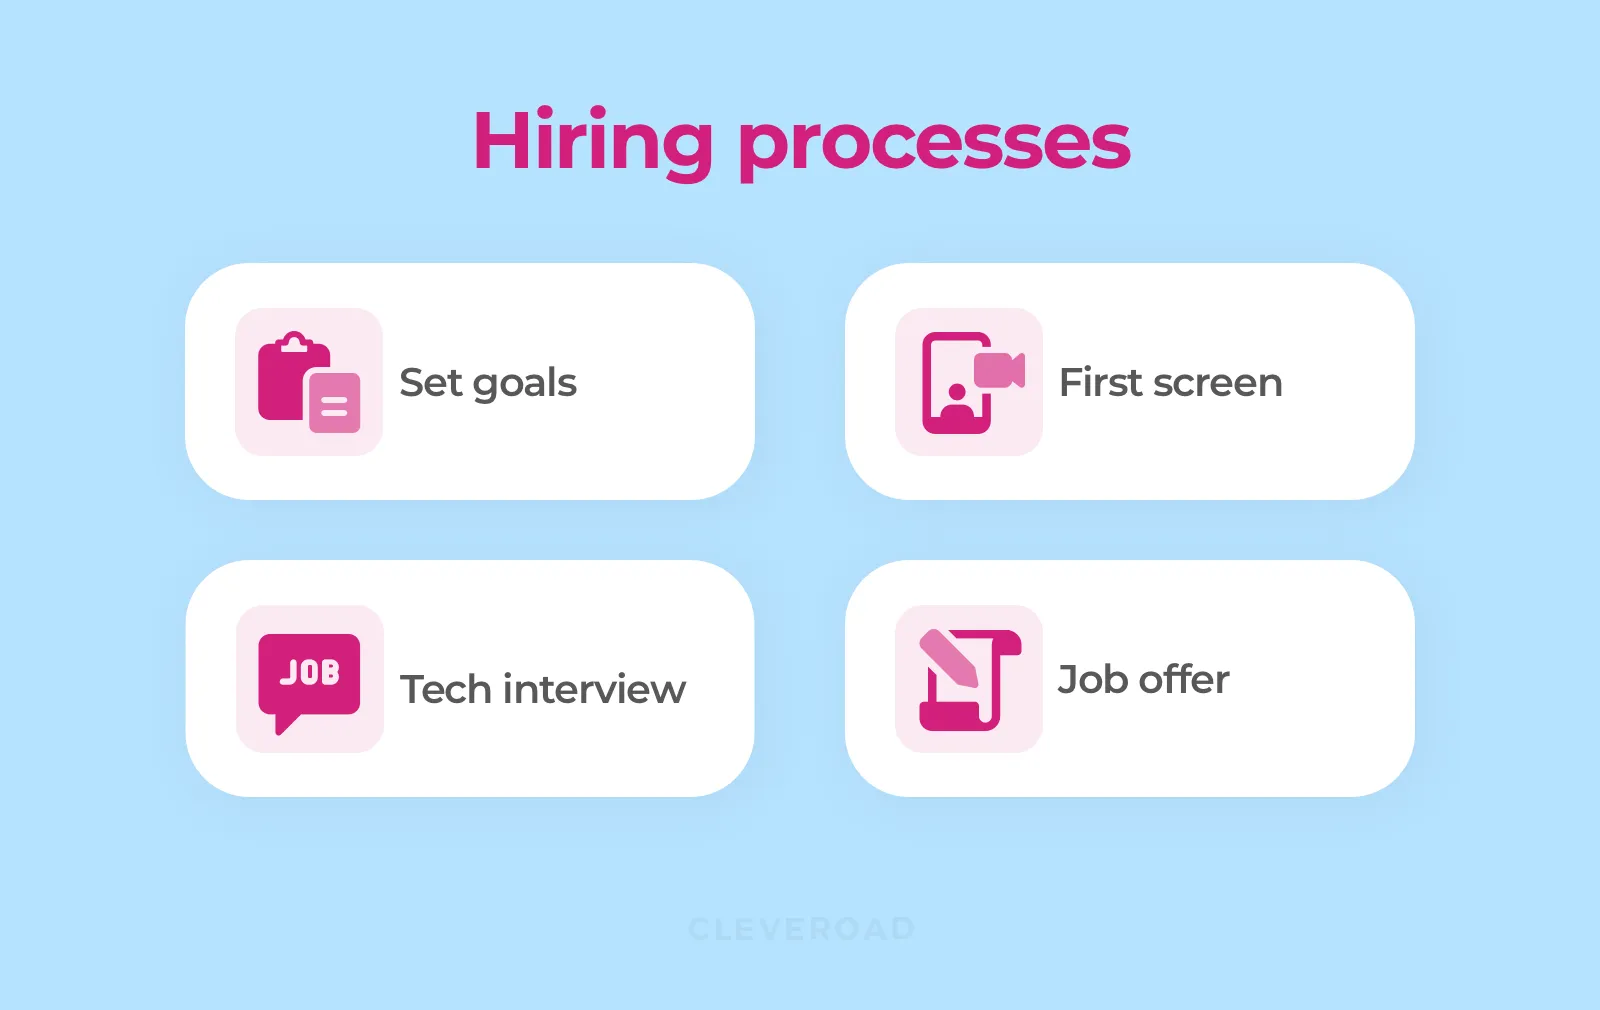 Interview processes to hire remote developers